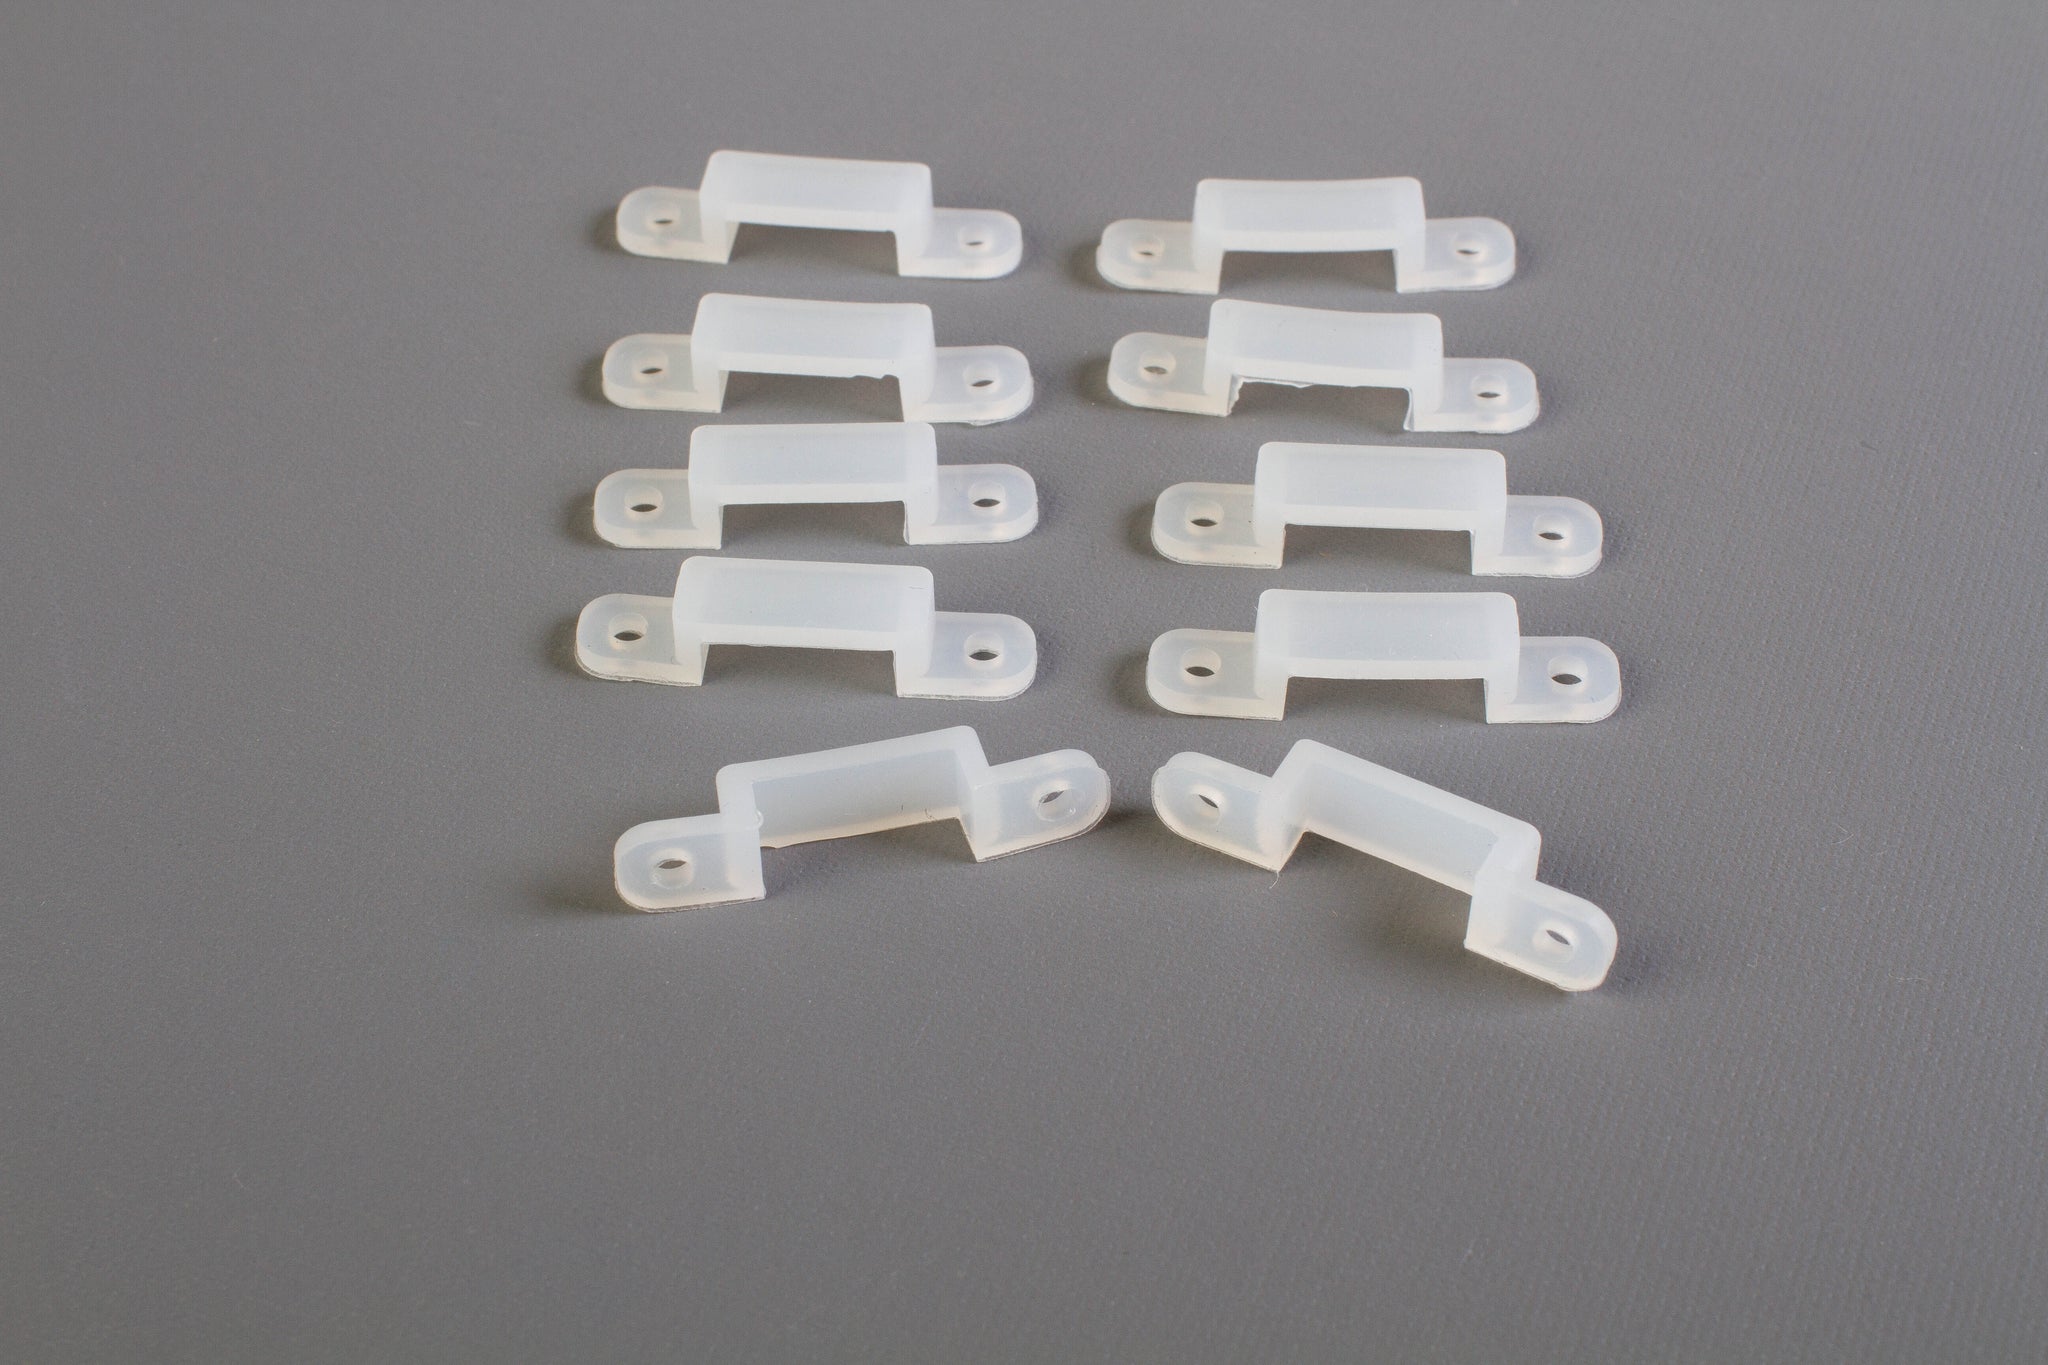 VIPMOON 100pcs Mounting Brackets Clips for 10mm Wide IP65 Waterproof 5050  LED Strip Light, Screws Included